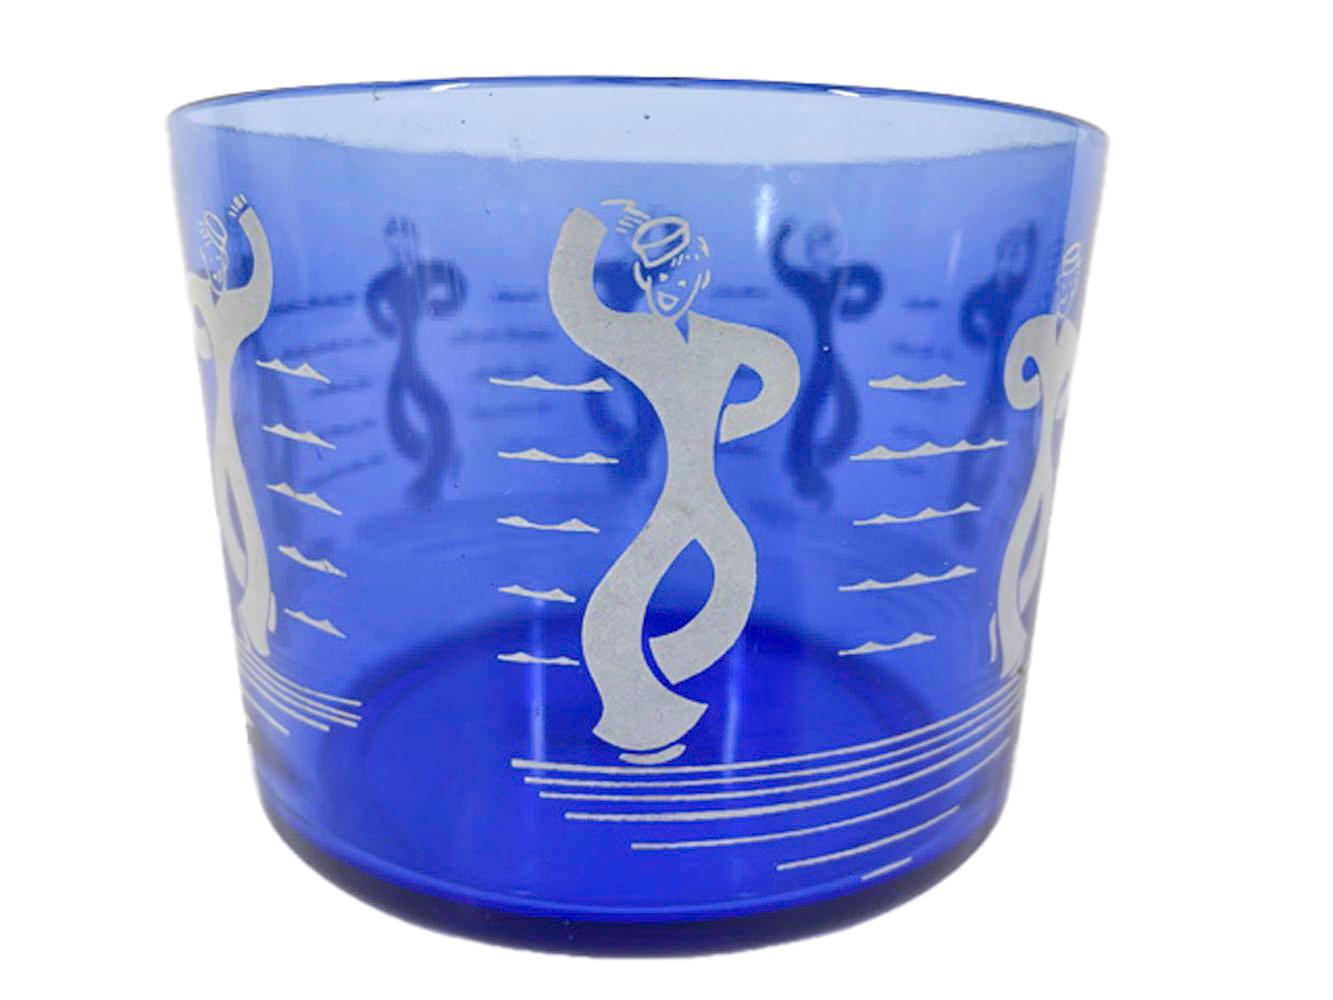 Art Deco ice bowl of cylindrical form with Dancing Sailors printed in white on cobalt glass.